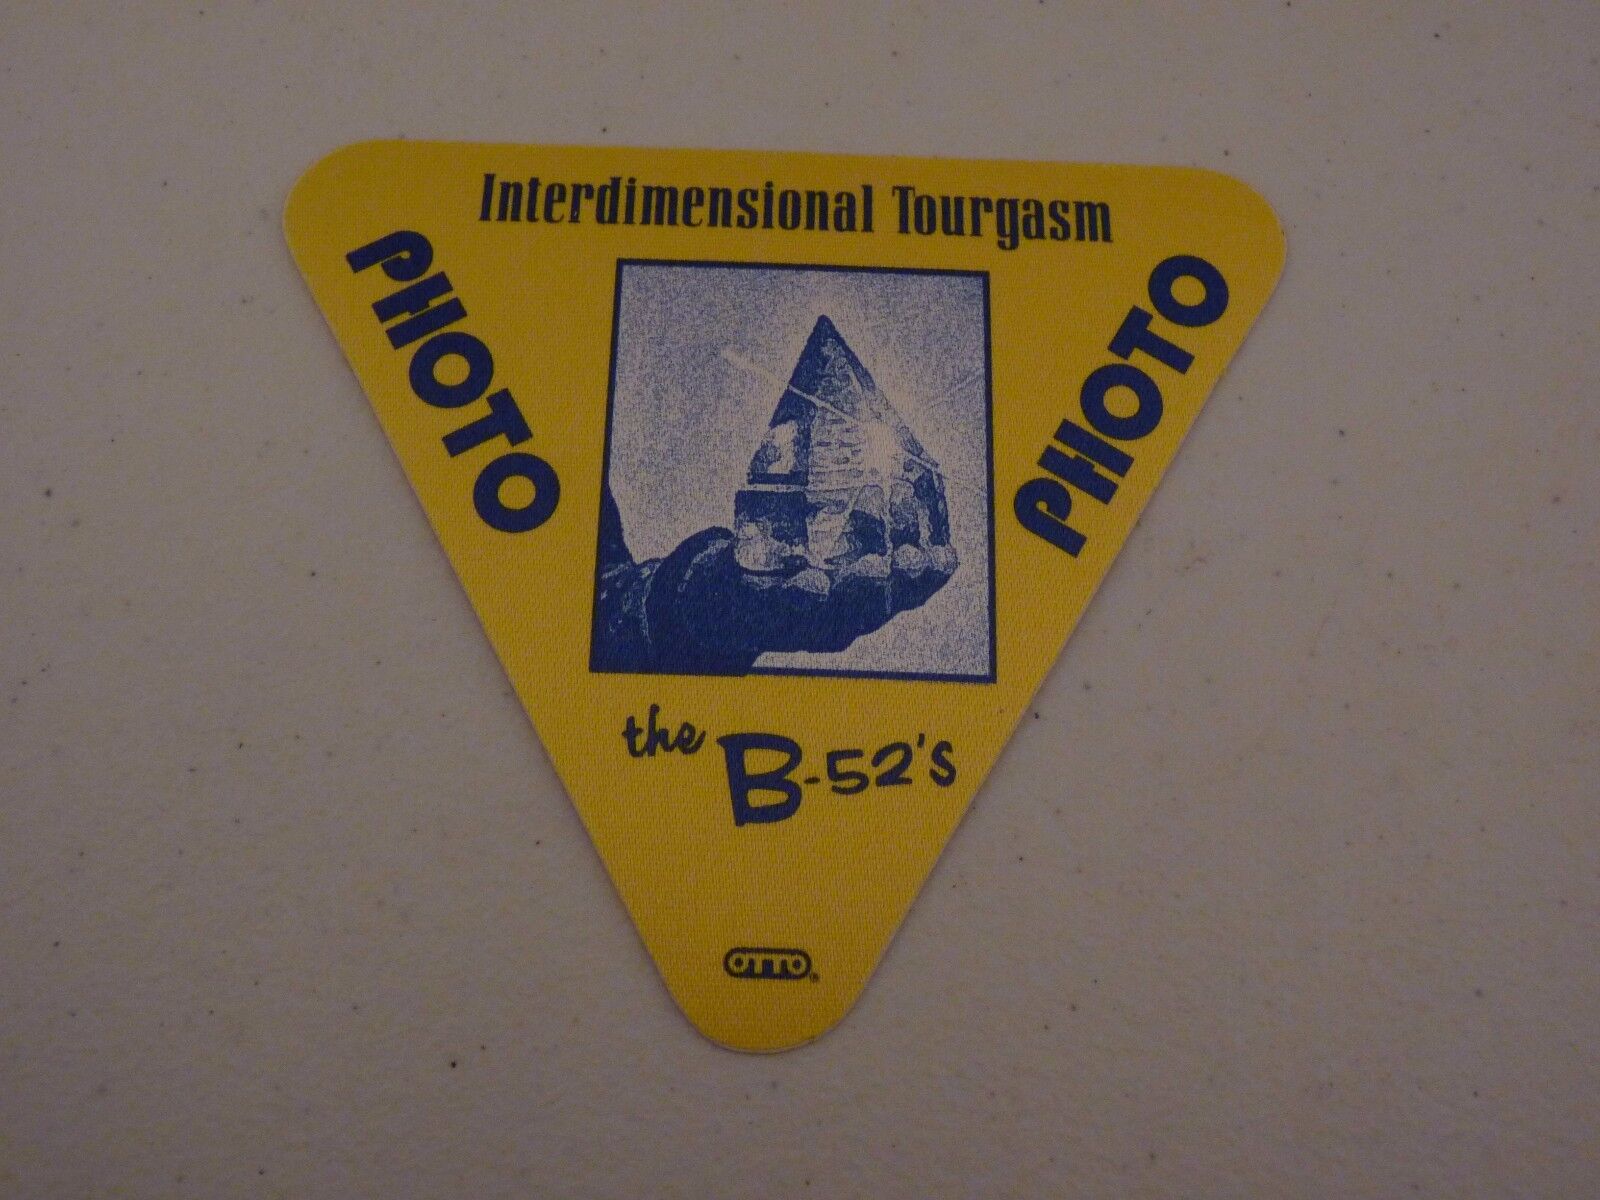 the B-52's Interdimensional Tourgasm Photo Poster painting Backstage Concert Pass